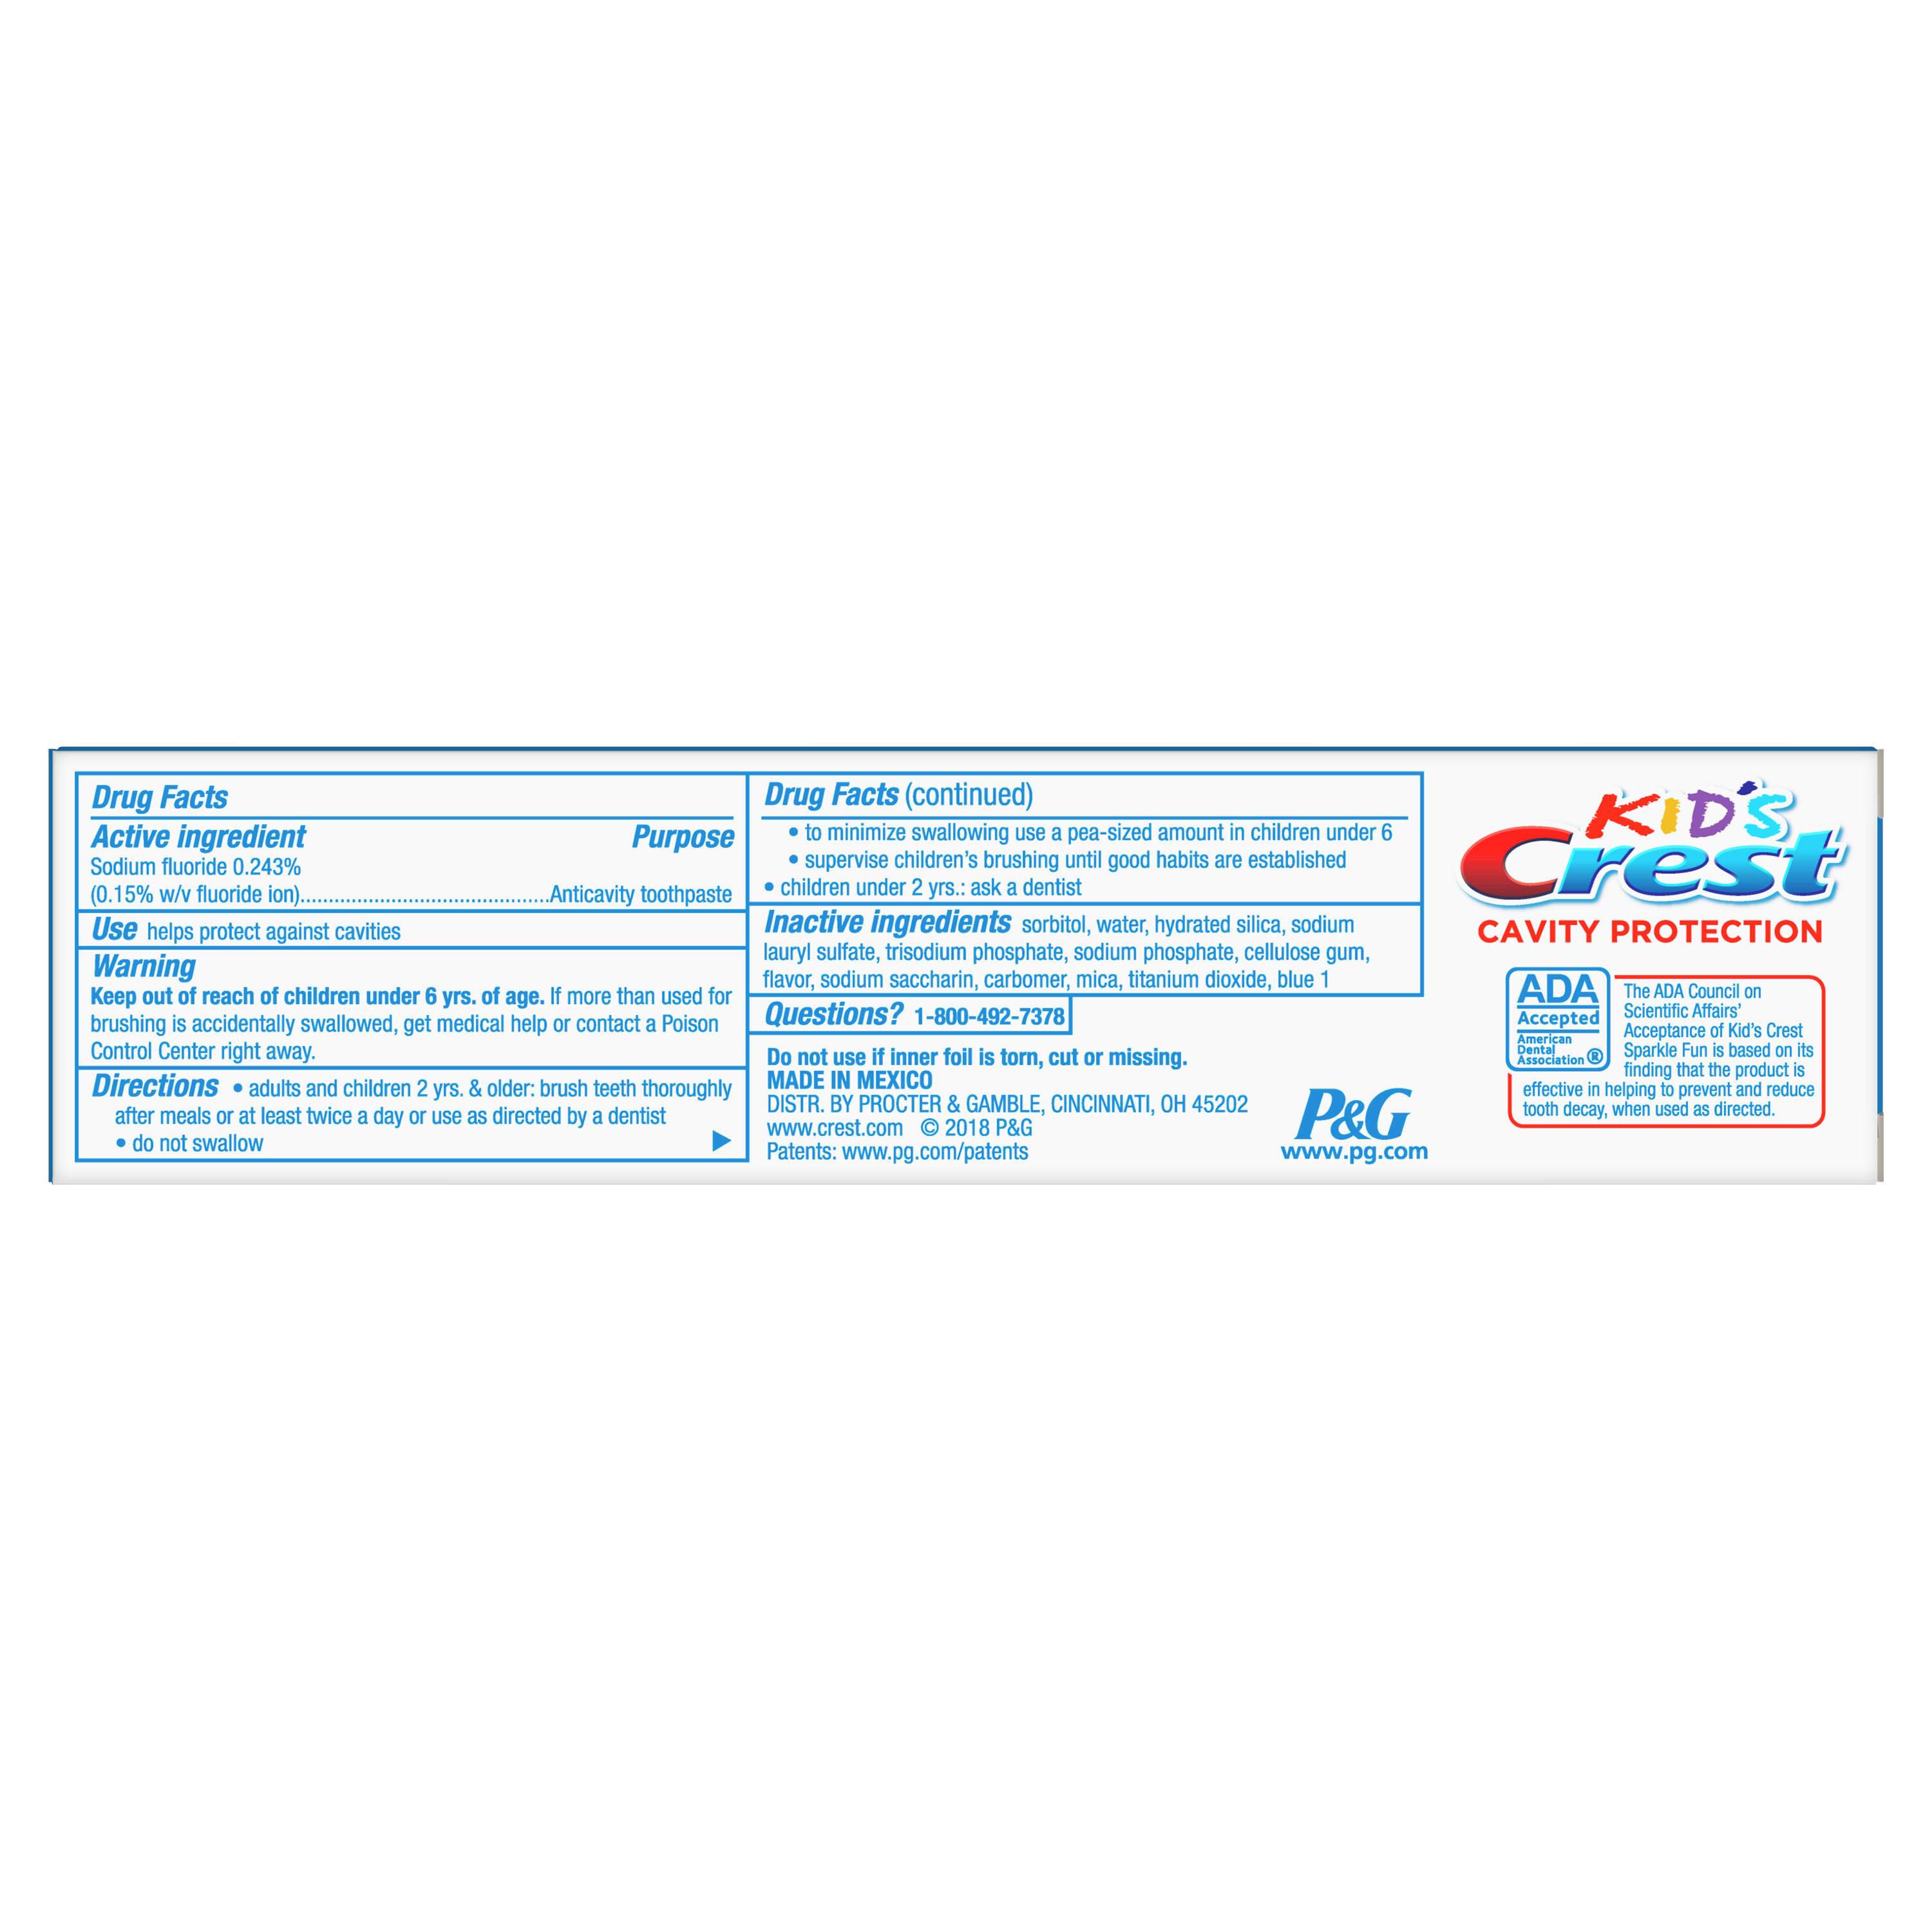 Crest Kid's Cavity Protection Toothpaste, Sparkle Fun, 2.2 oz - image 2 of 7